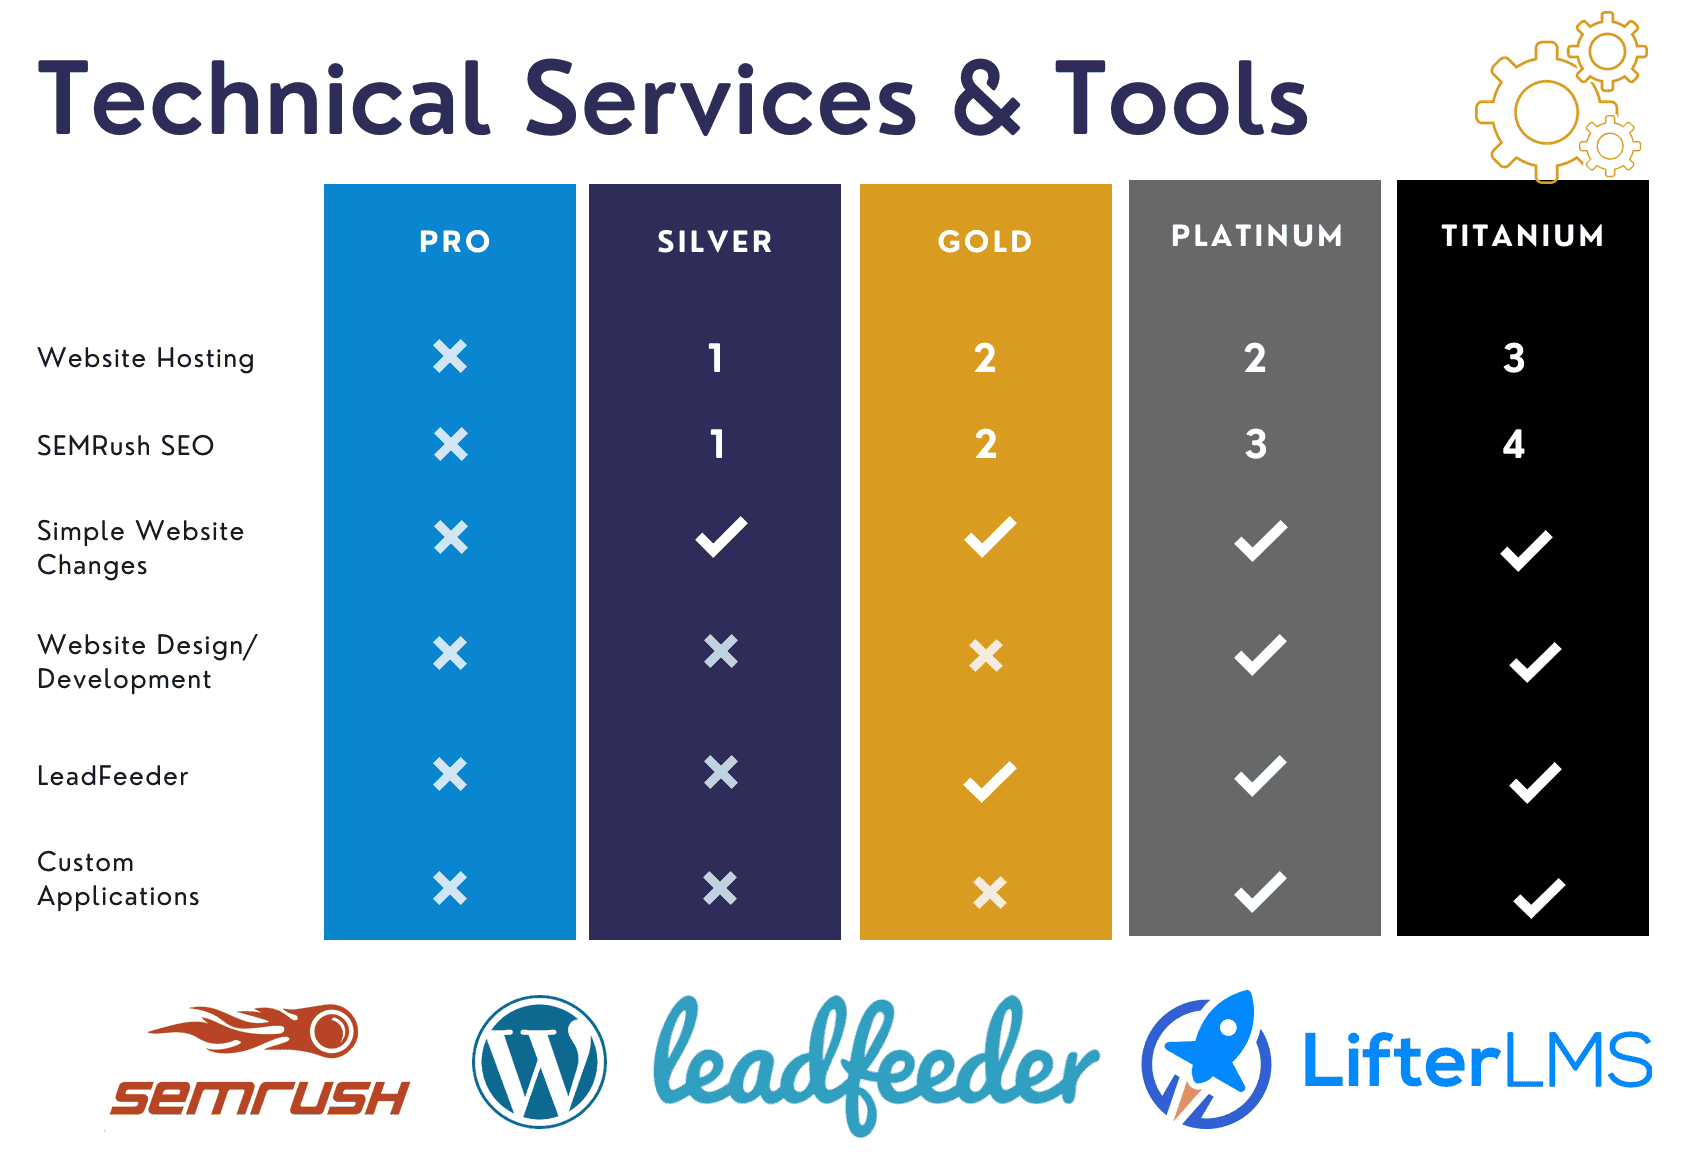 Technical Services & Tools